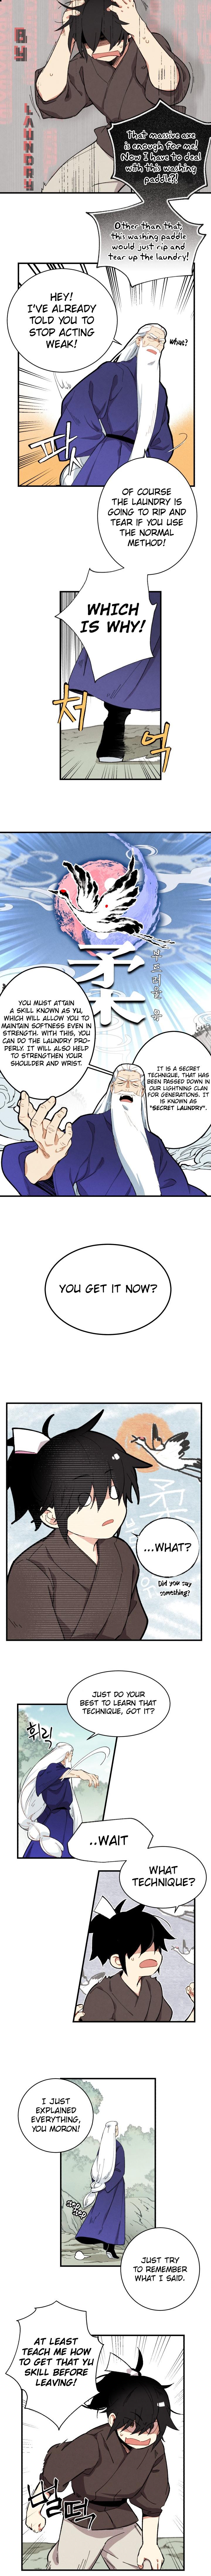 Lightning Degree - Chapter 3 Page 10